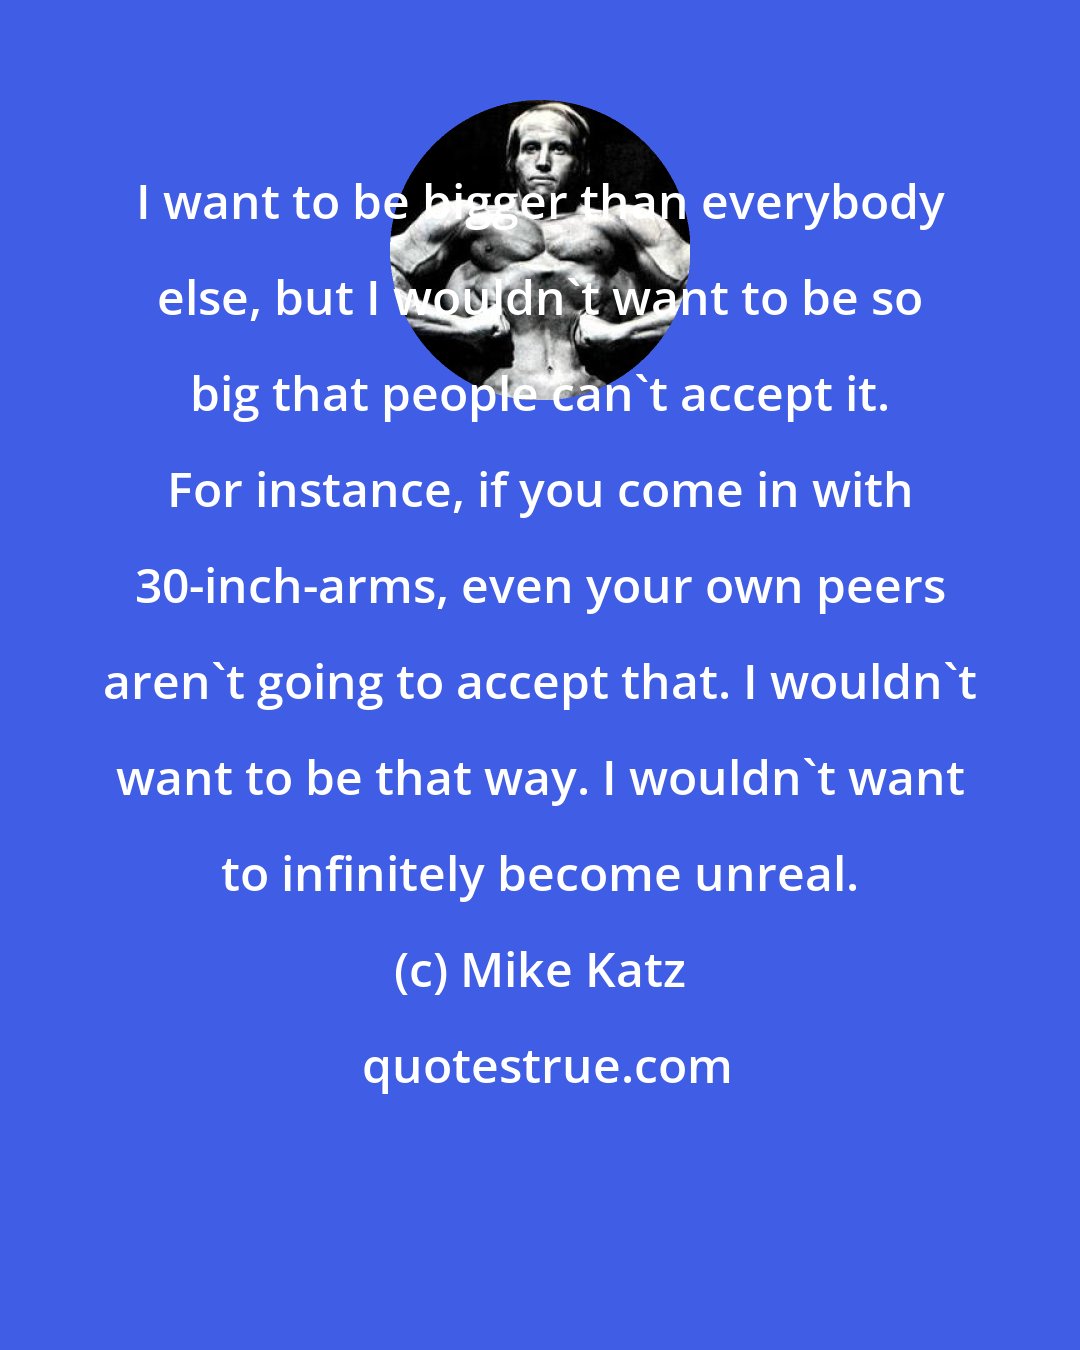 Mike Katz: I want to be bigger than everybody else, but I wouldn't want to be so big that people can't accept it. For instance, if you come in with 30-inch-arms, even your own peers aren't going to accept that. I wouldn't want to be that way. I wouldn't want to infinitely become unreal.